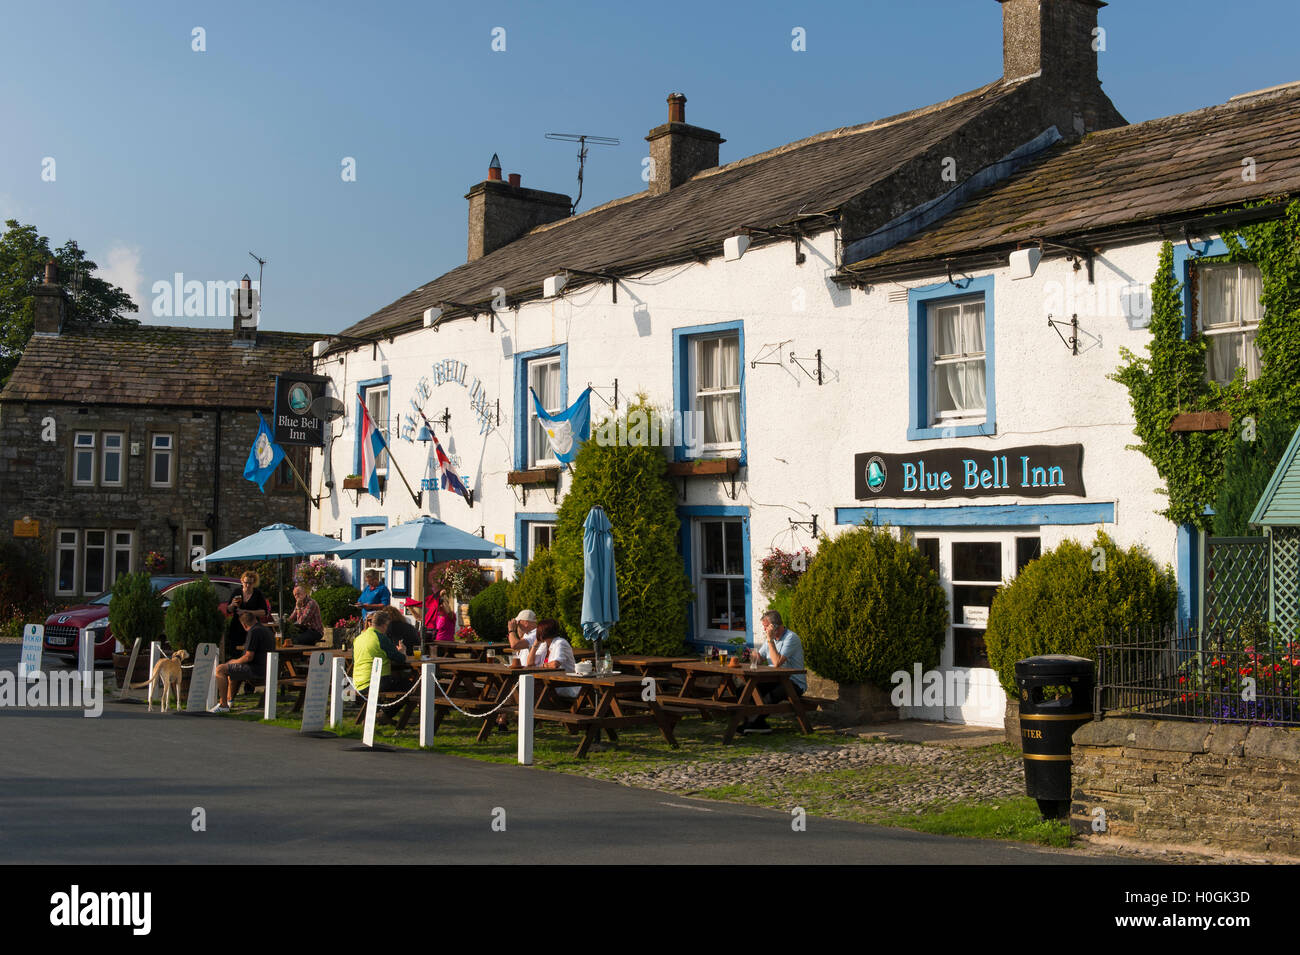 People eat & drink al fresco in the sun at attractive, traditional English pub - The Blue Bell Inn, Kettlewell village, Yorkshire Dales, England, UK. Stock Photo